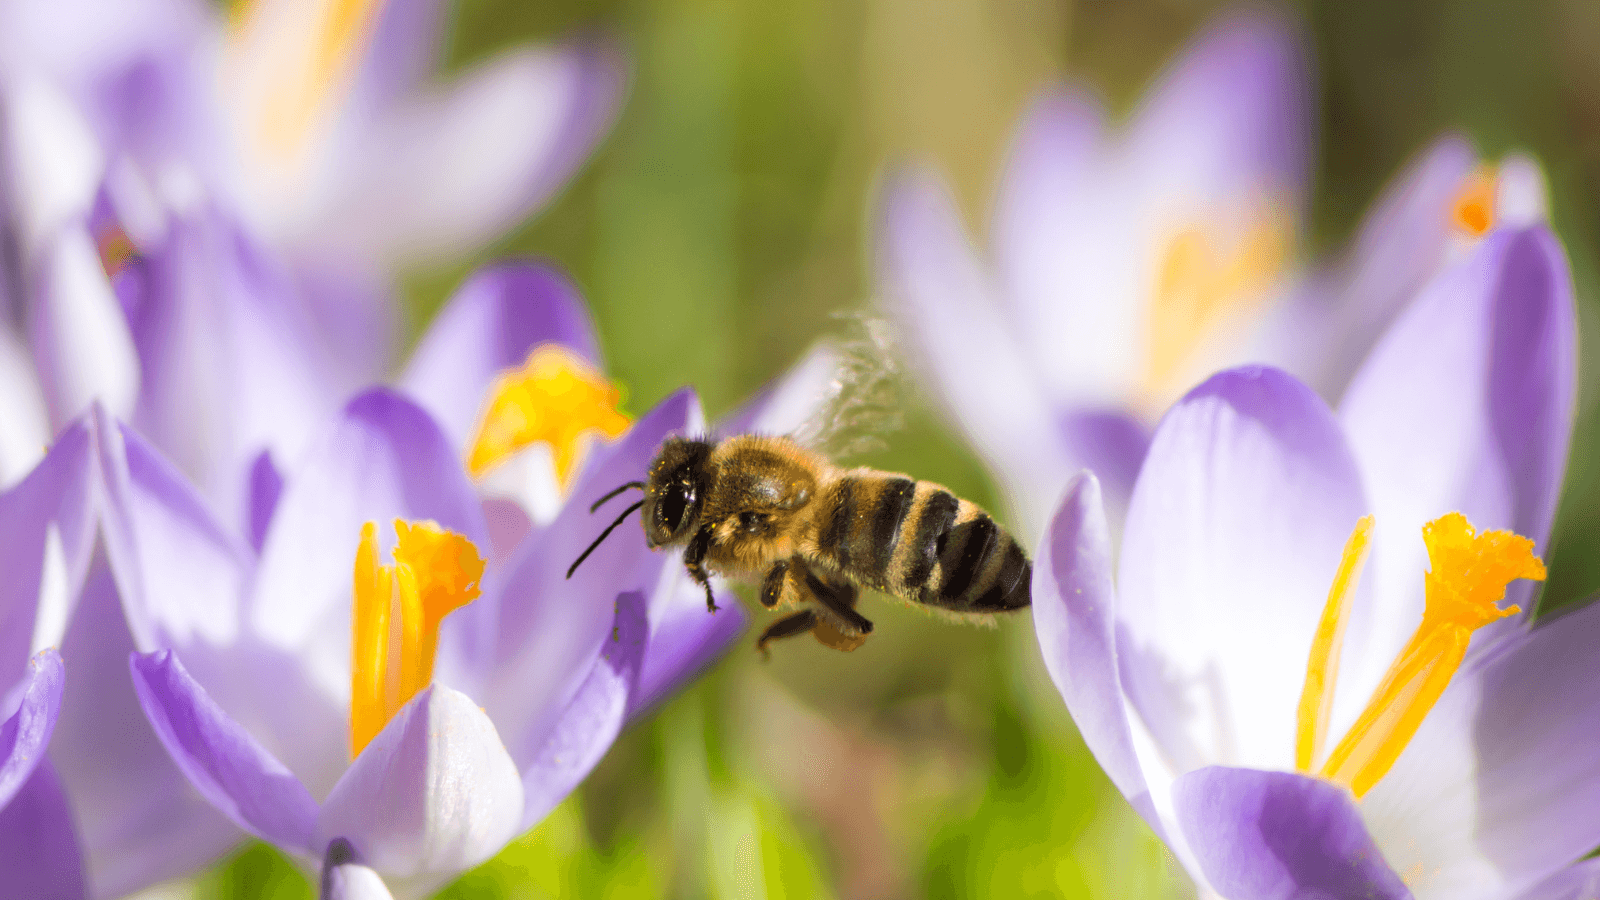 A honeybee flies above some purple and yellow flowers 